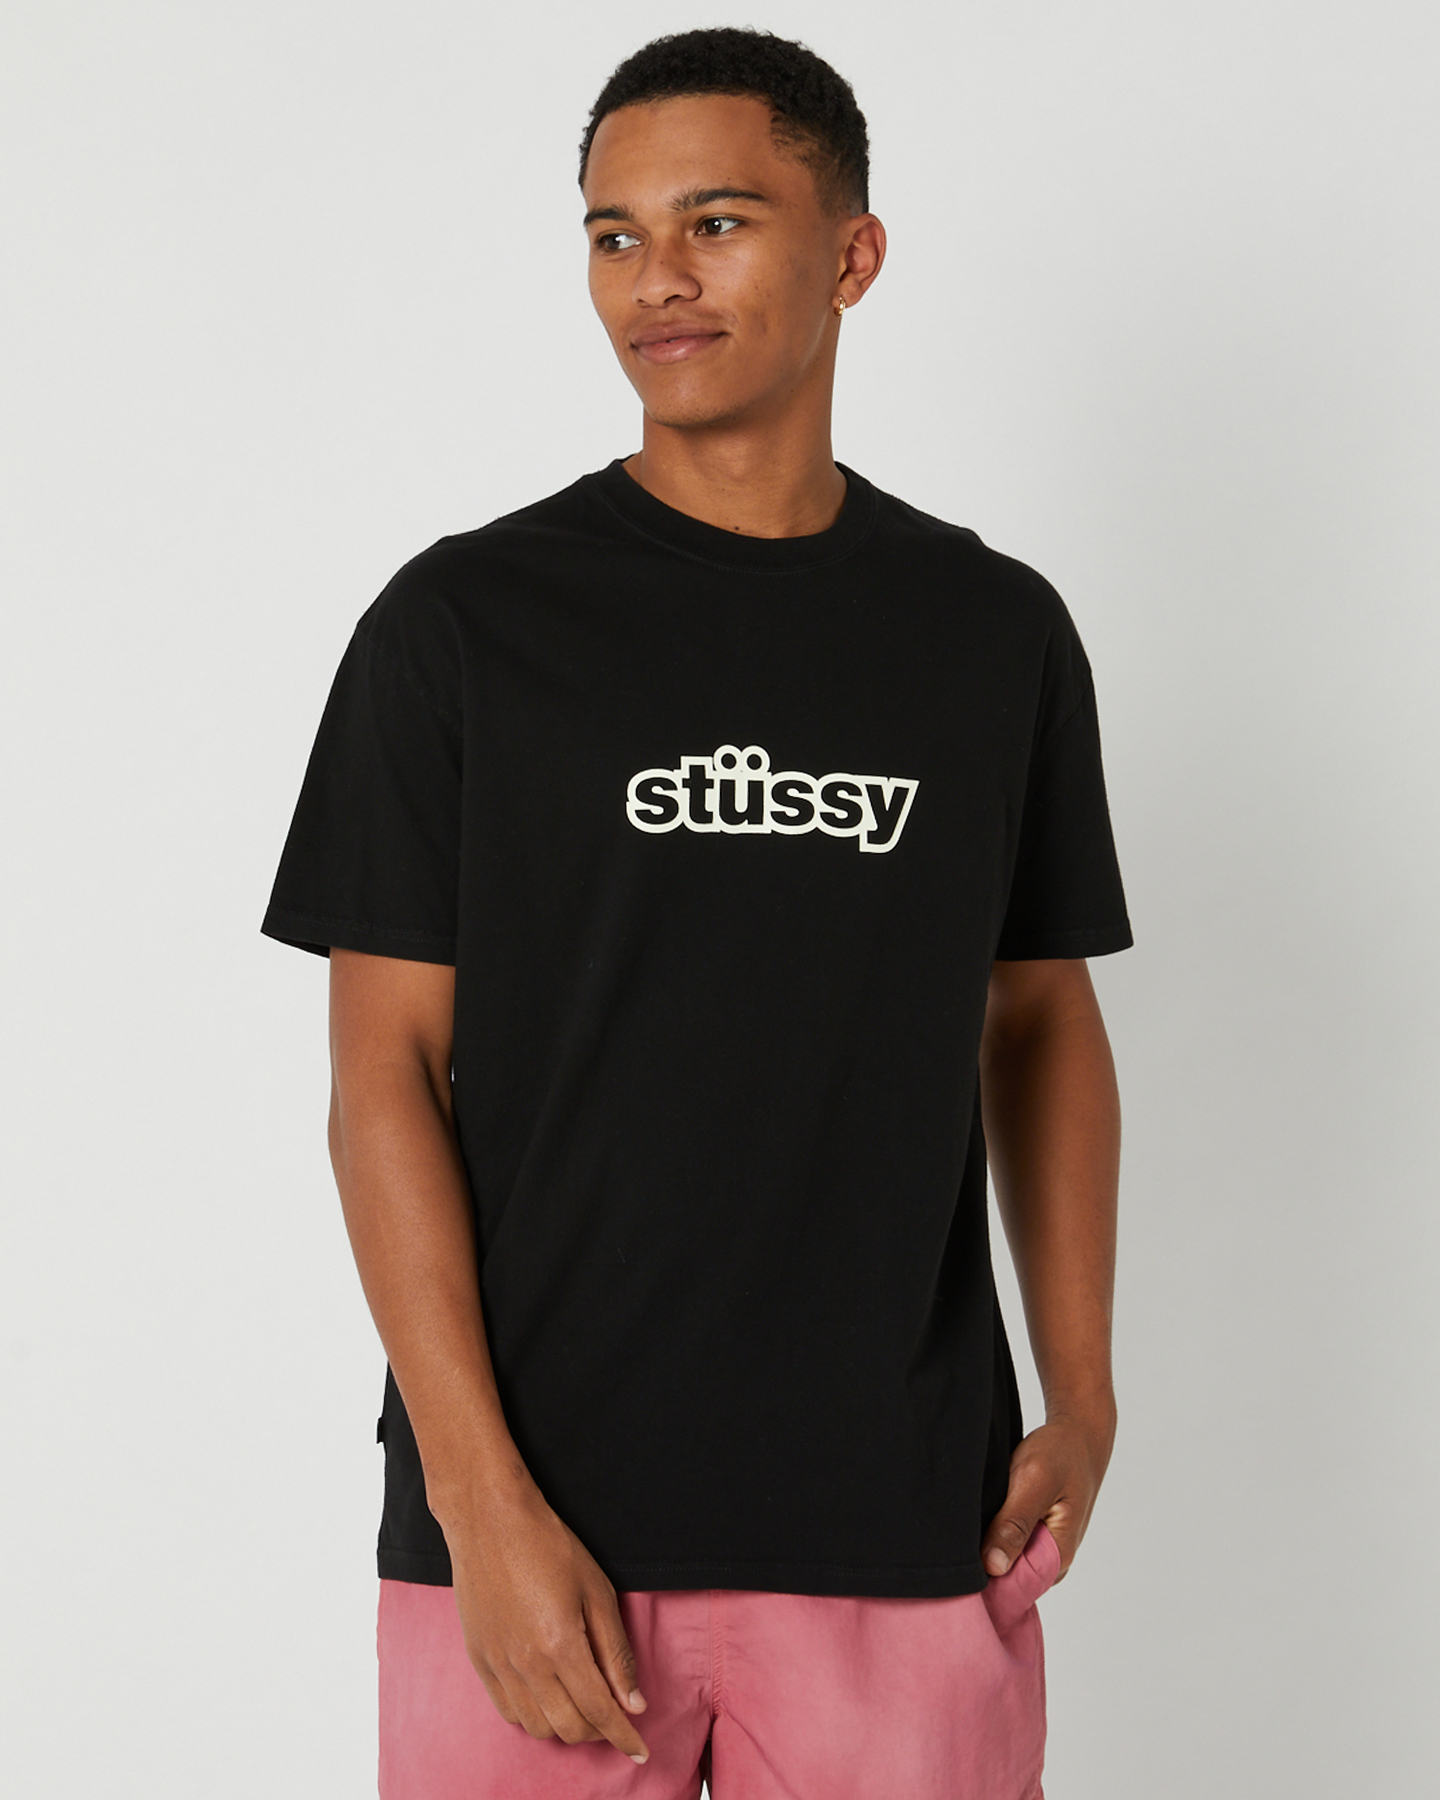 Stussy Thick 50-50 Pigment Ss Tee - Pigment Black | SurfStitch